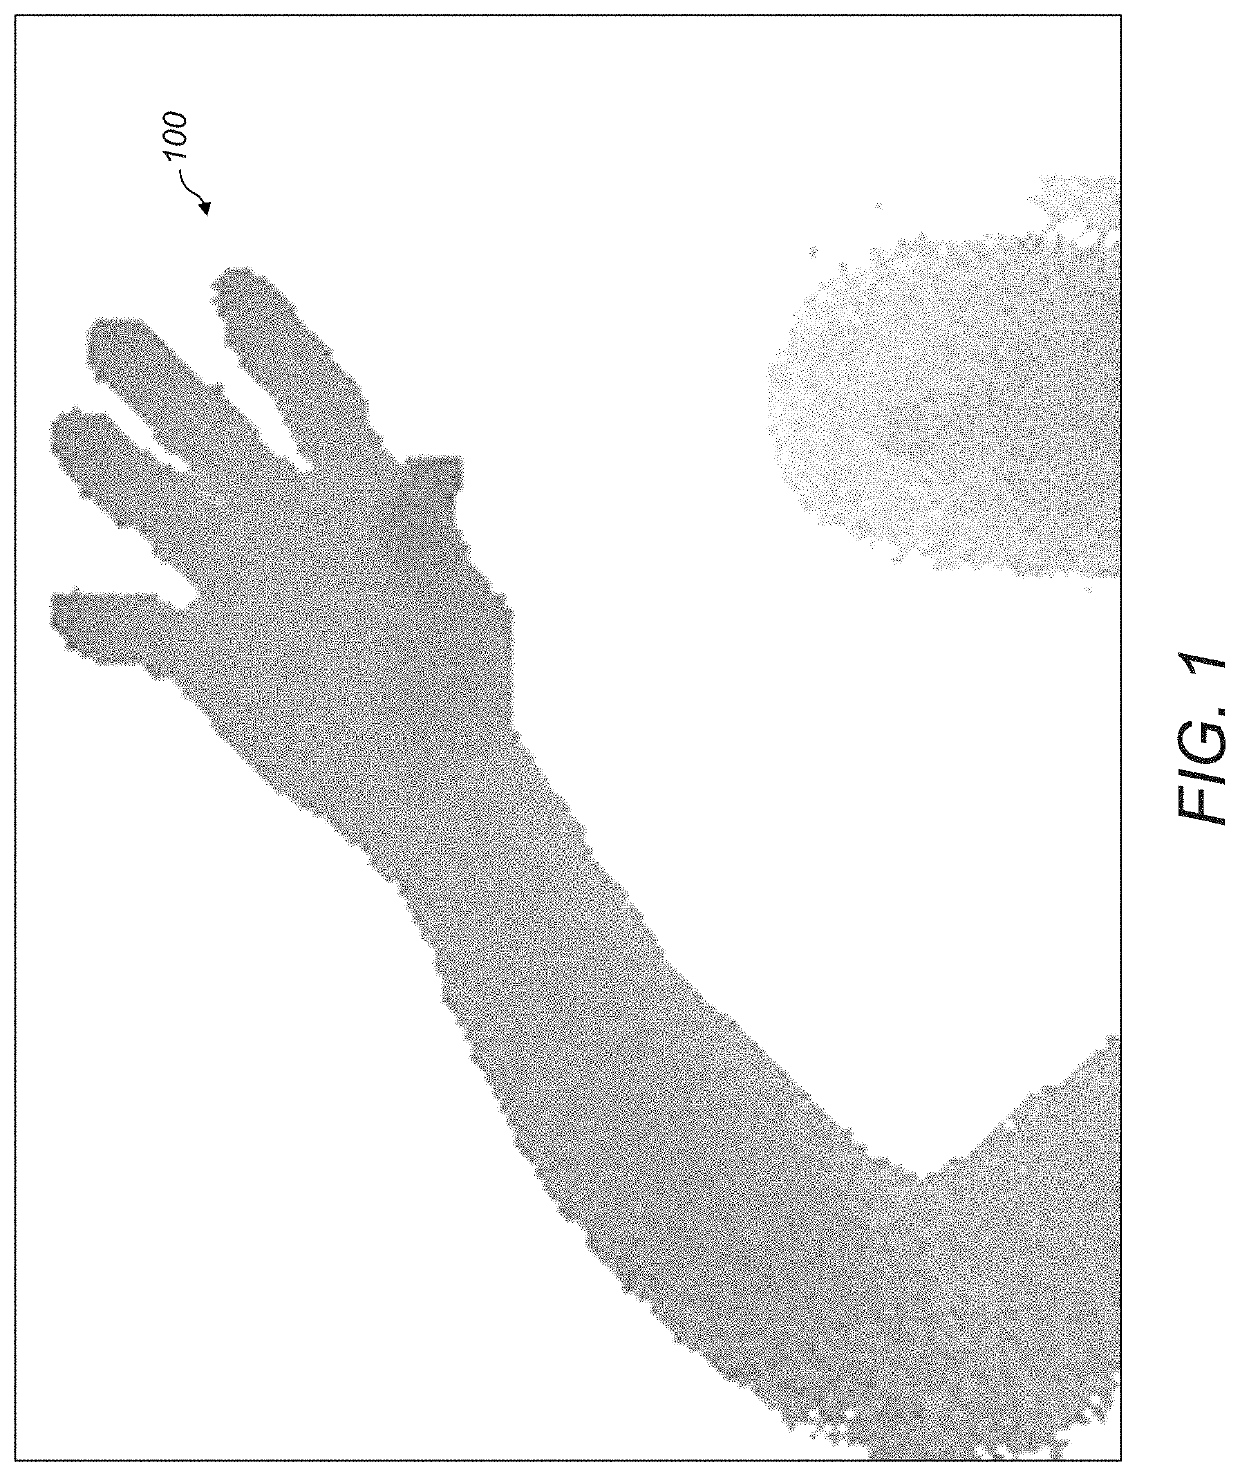 Using Iterative 3D-Model Fitting for Domain Adaptation of a Hand-Pose-Estimation Neural Network